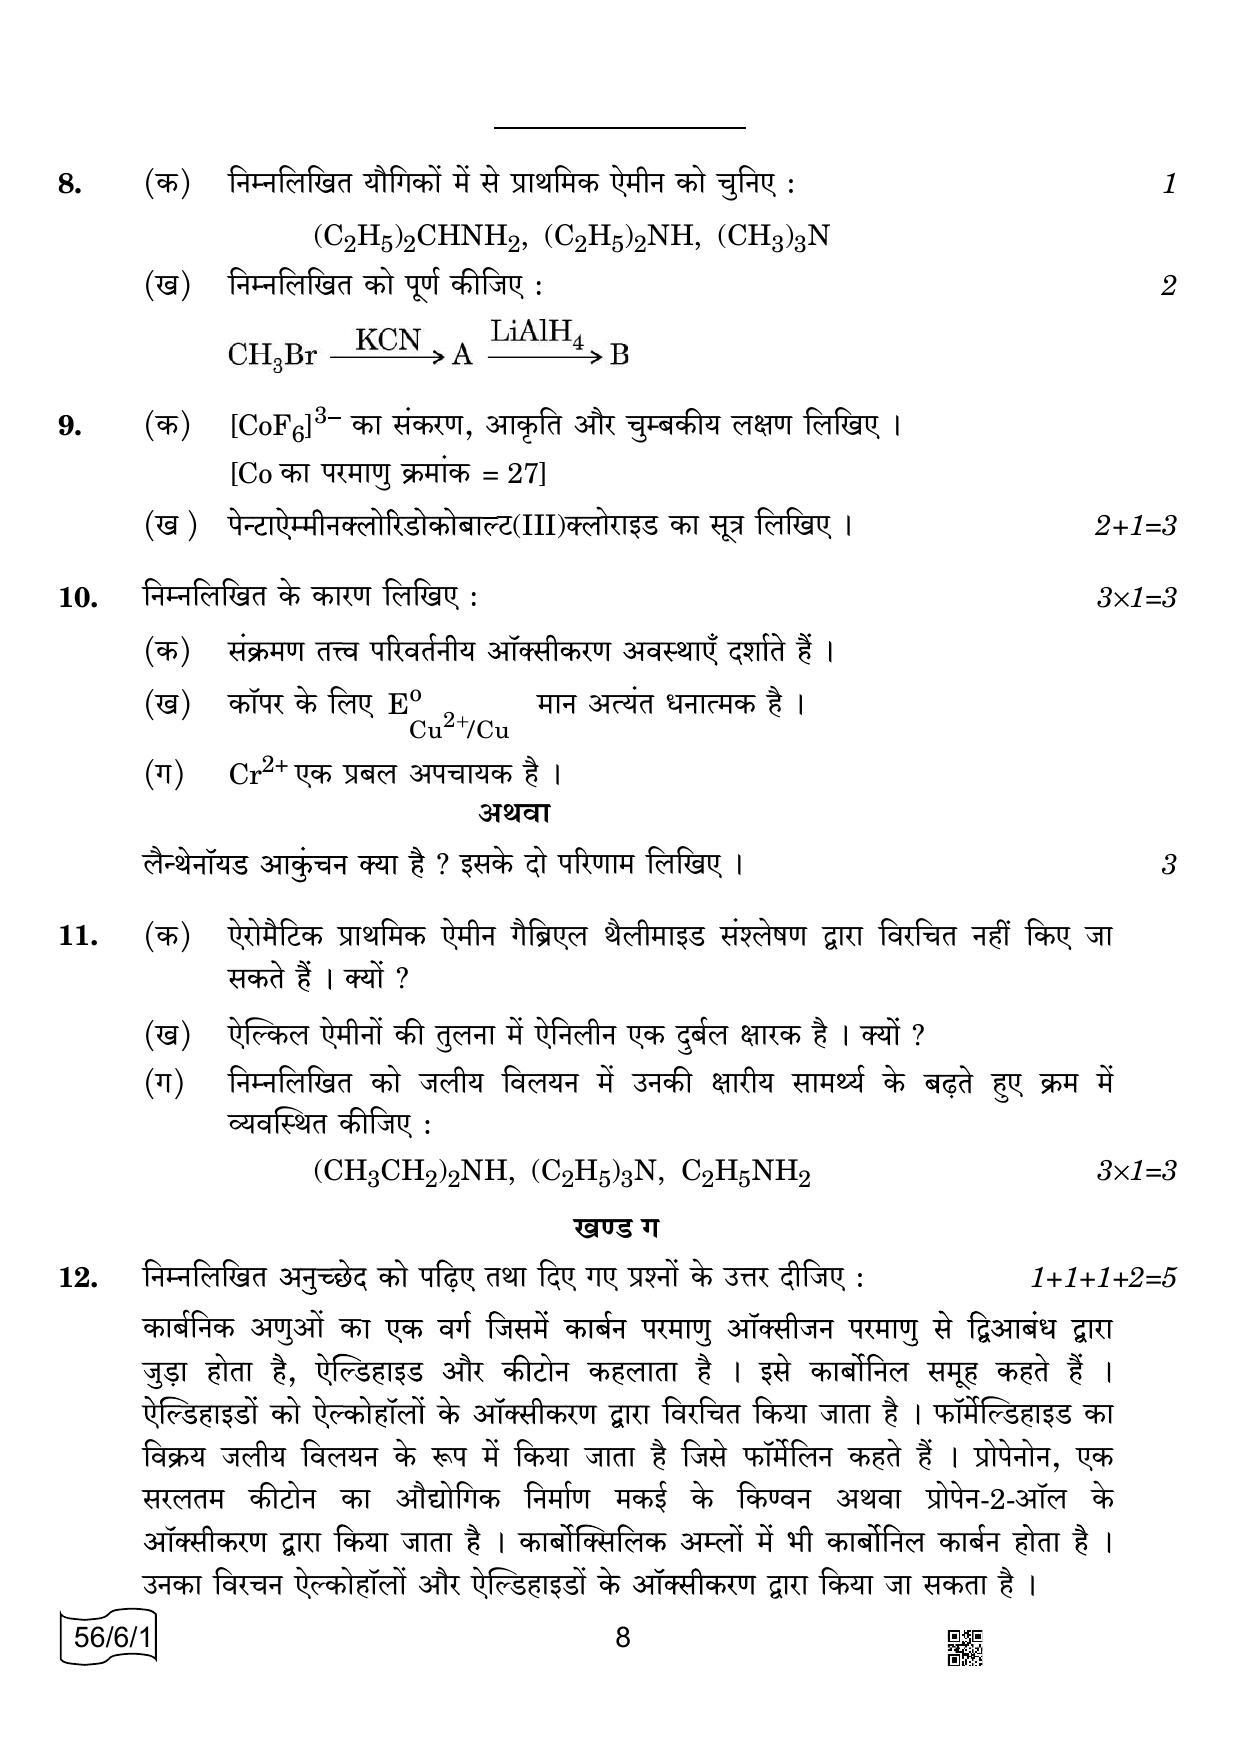 CBSE Class 12 56-6-1 CHEMISTRY 2022 Compartment Question Paper - Page 8